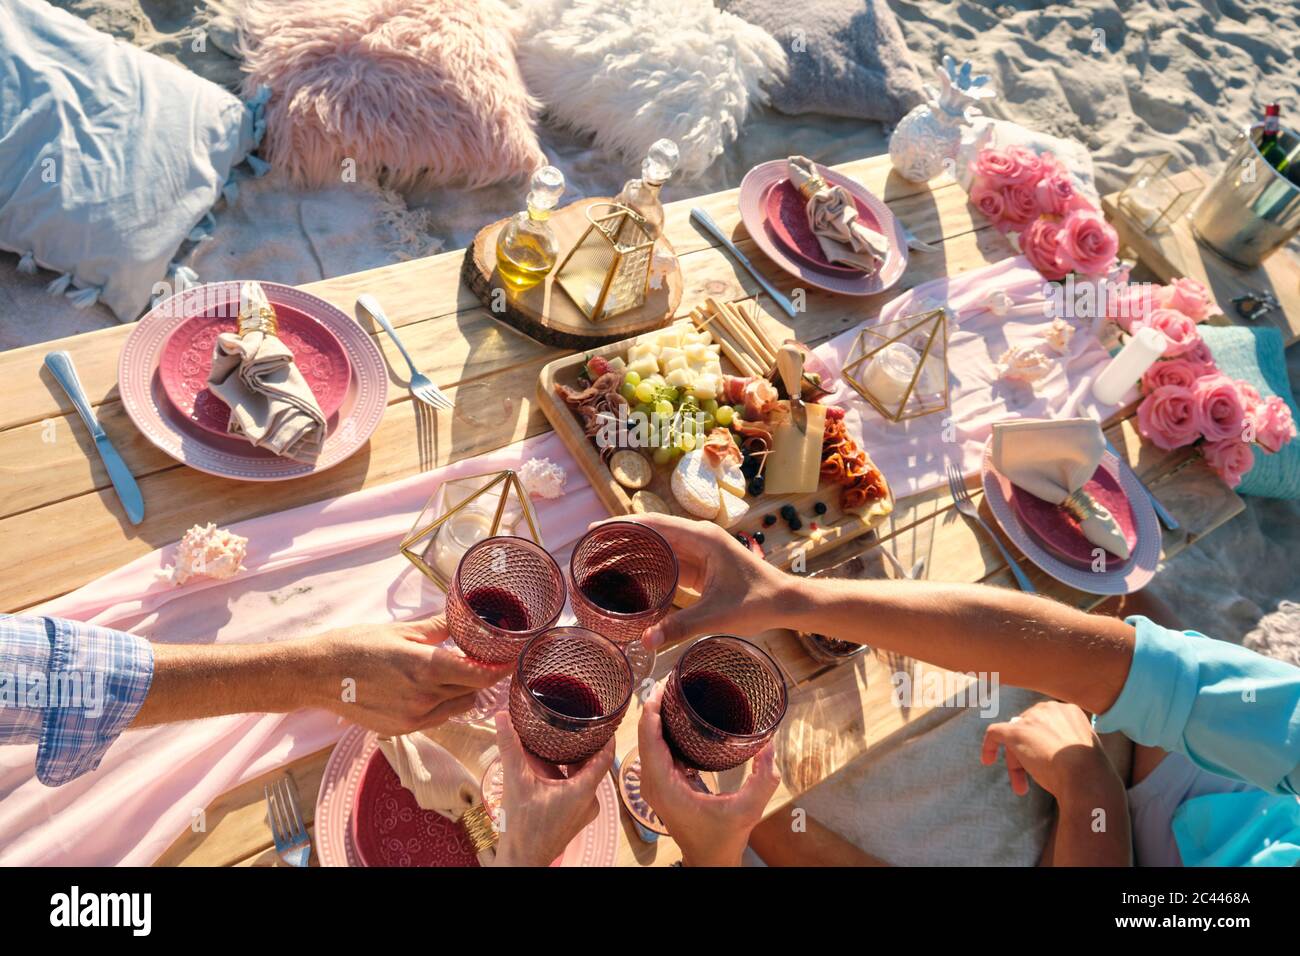 Luxury beach picnic close up with multiple people and a delicious